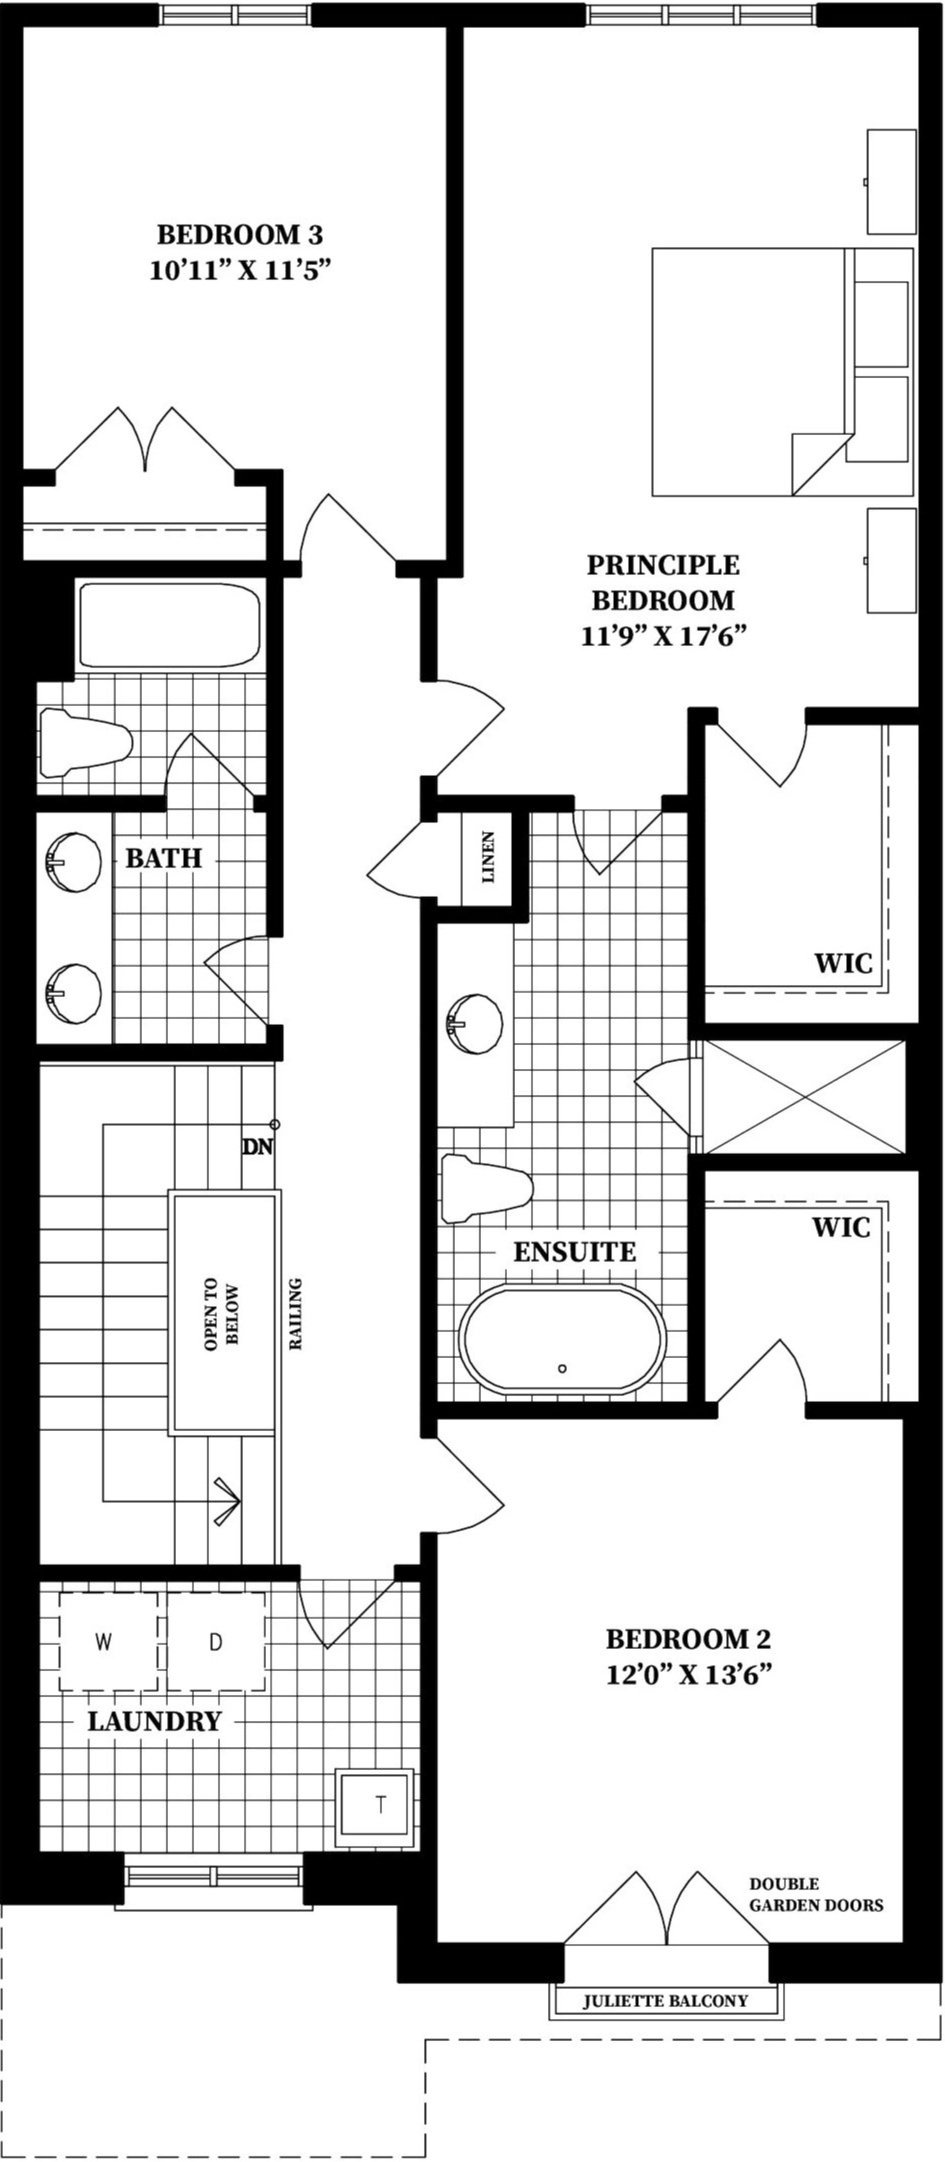  Floor Plan of King's Cross Homes with undefined beds